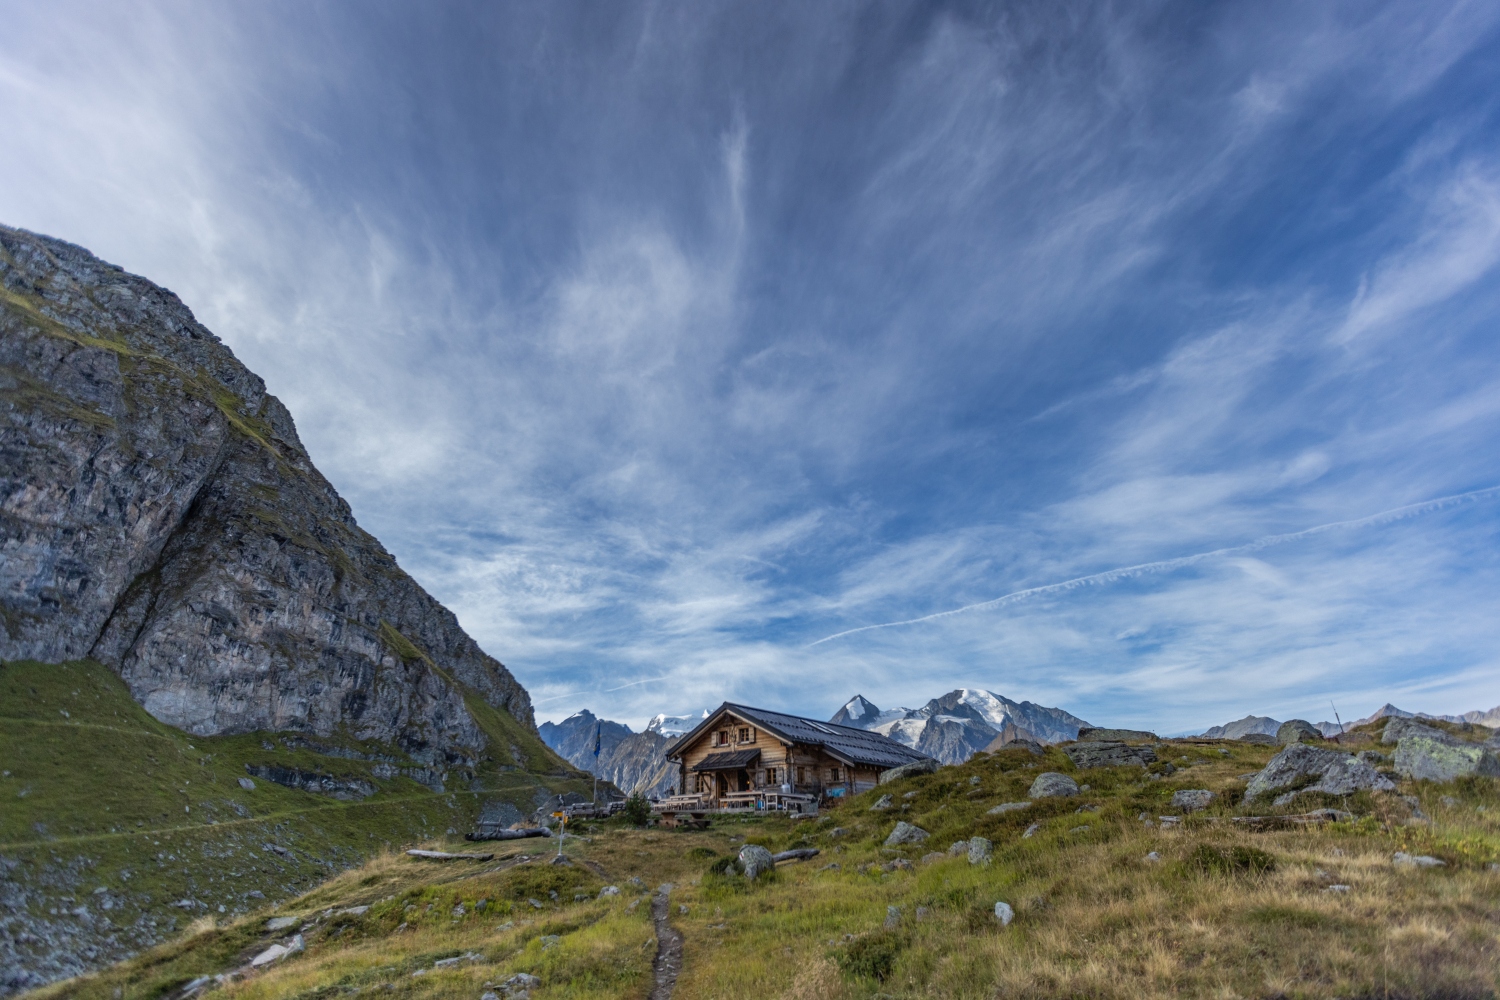 Hut at top of rocky hill with snow capped mountains in background - Verbier